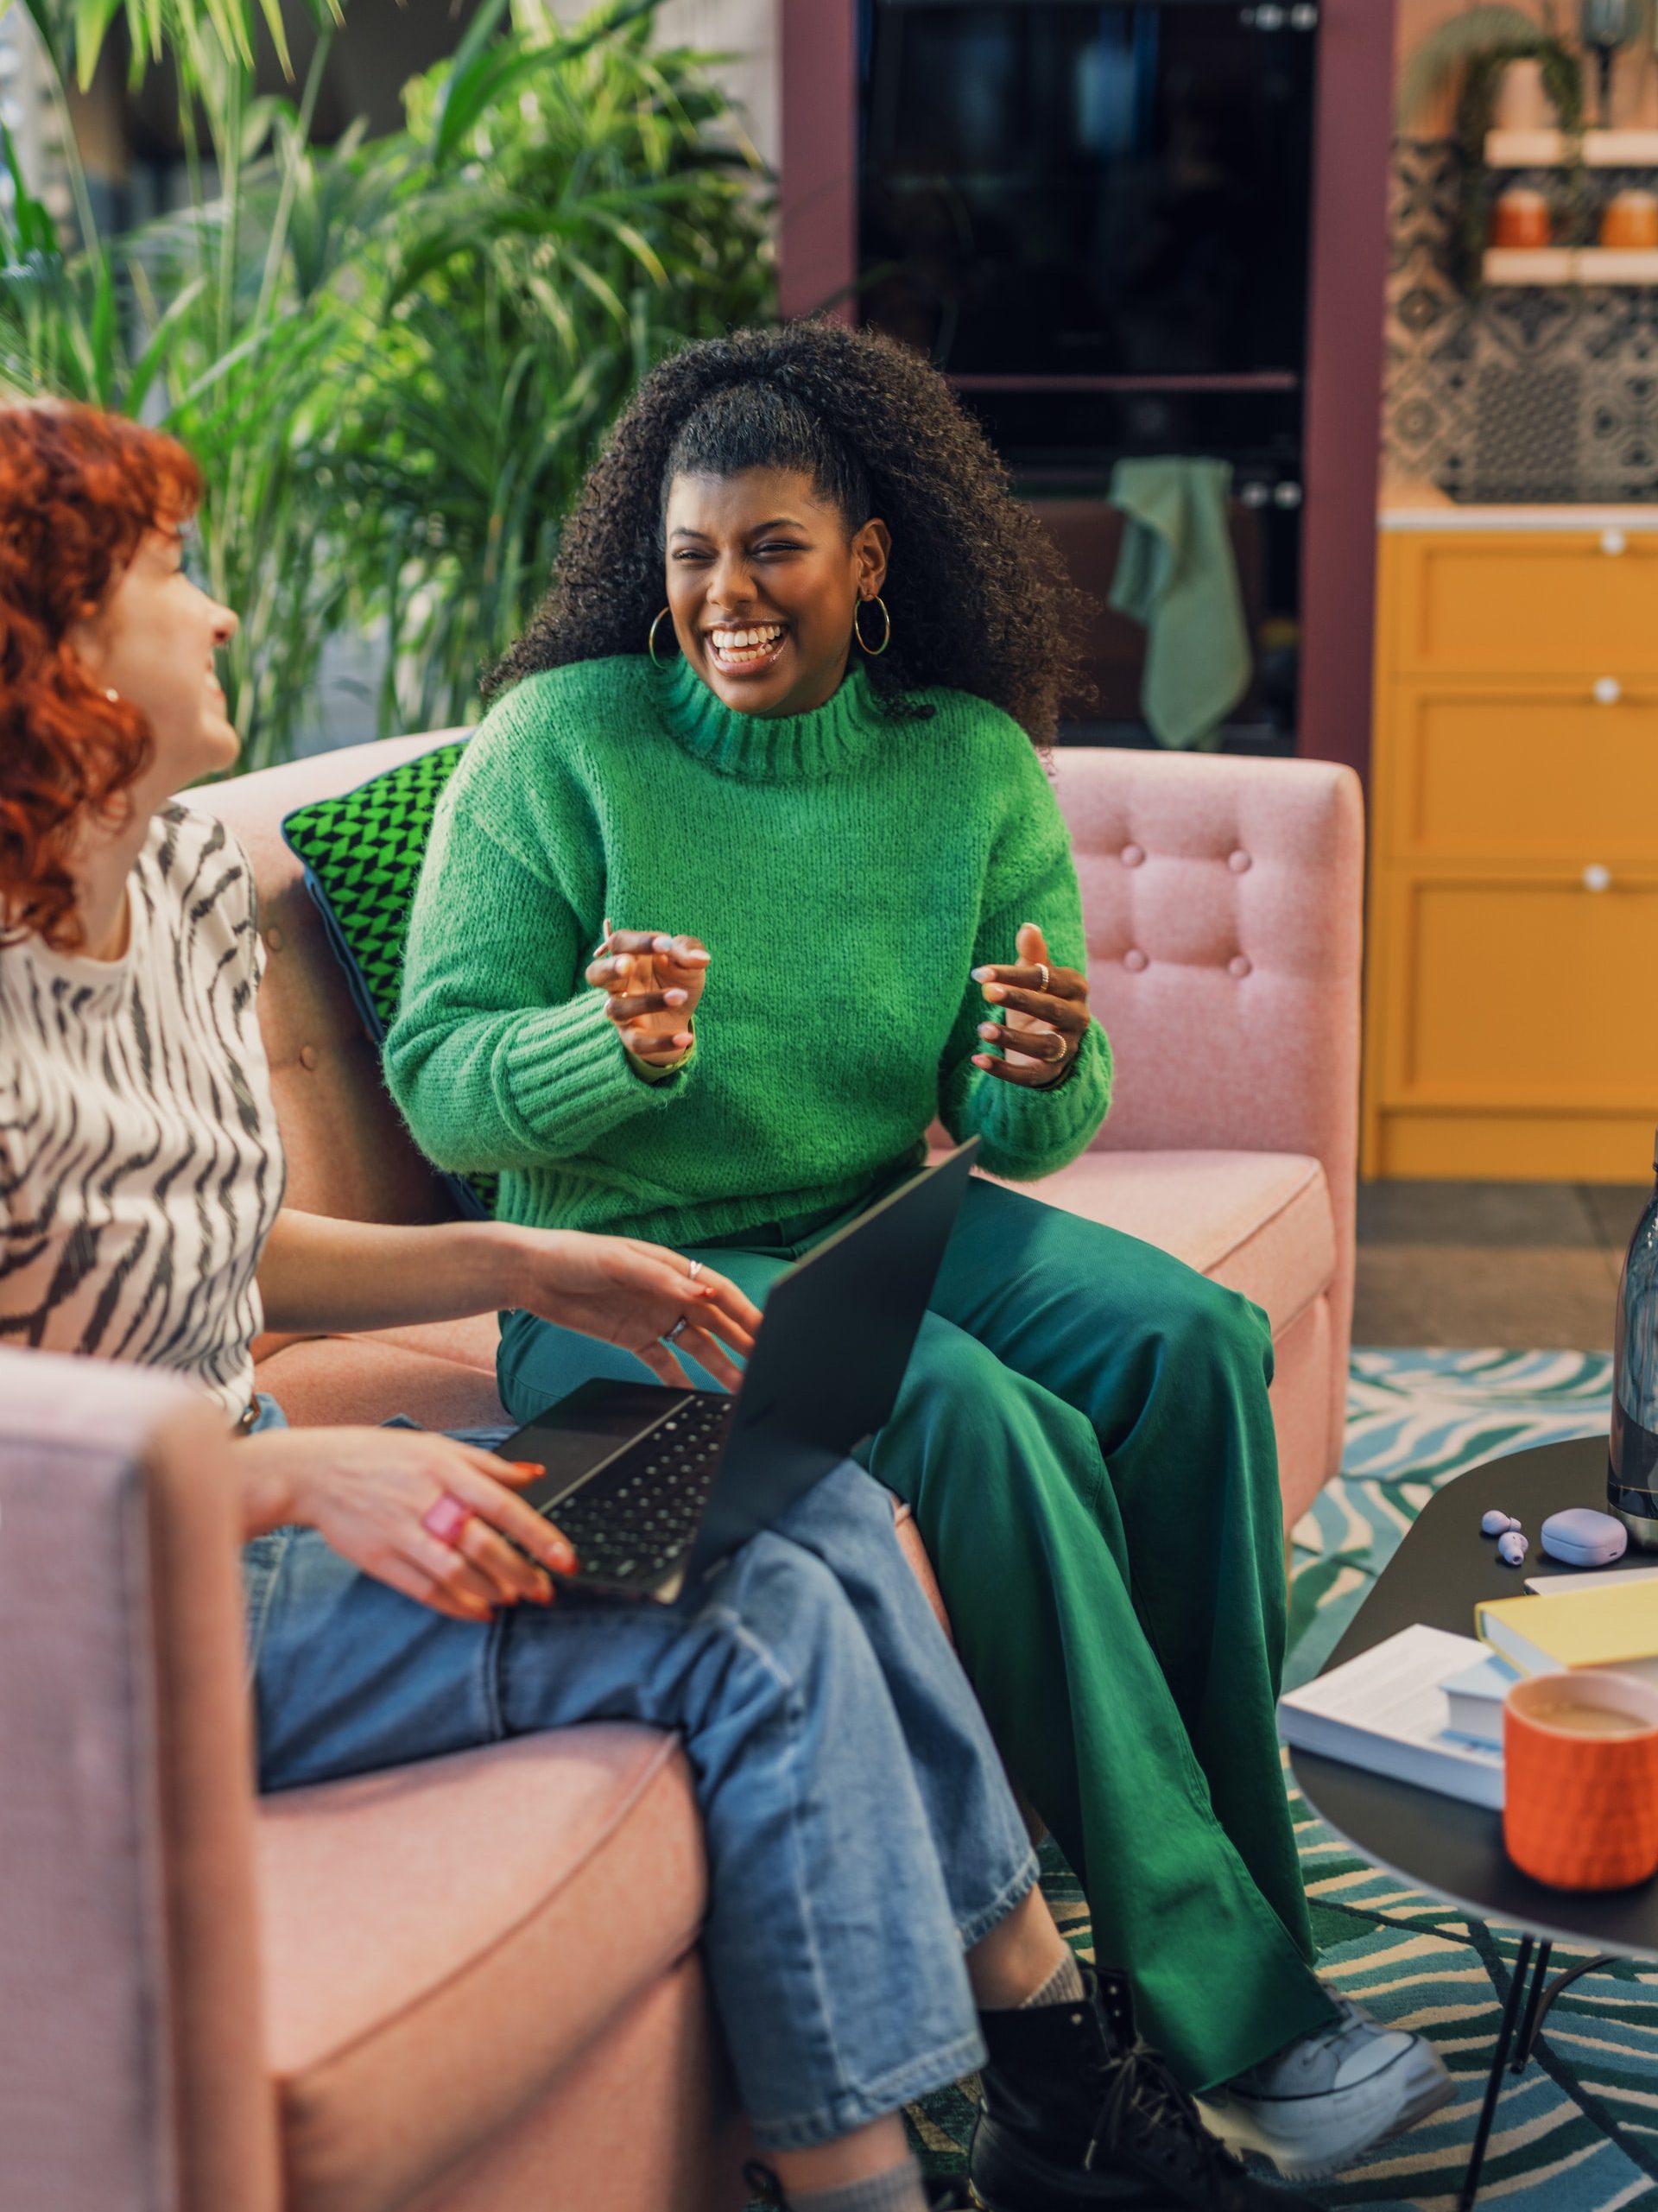 A Black woman wearing a green sweater and green pants smiling and talking to a woman with red hair holding a laptop